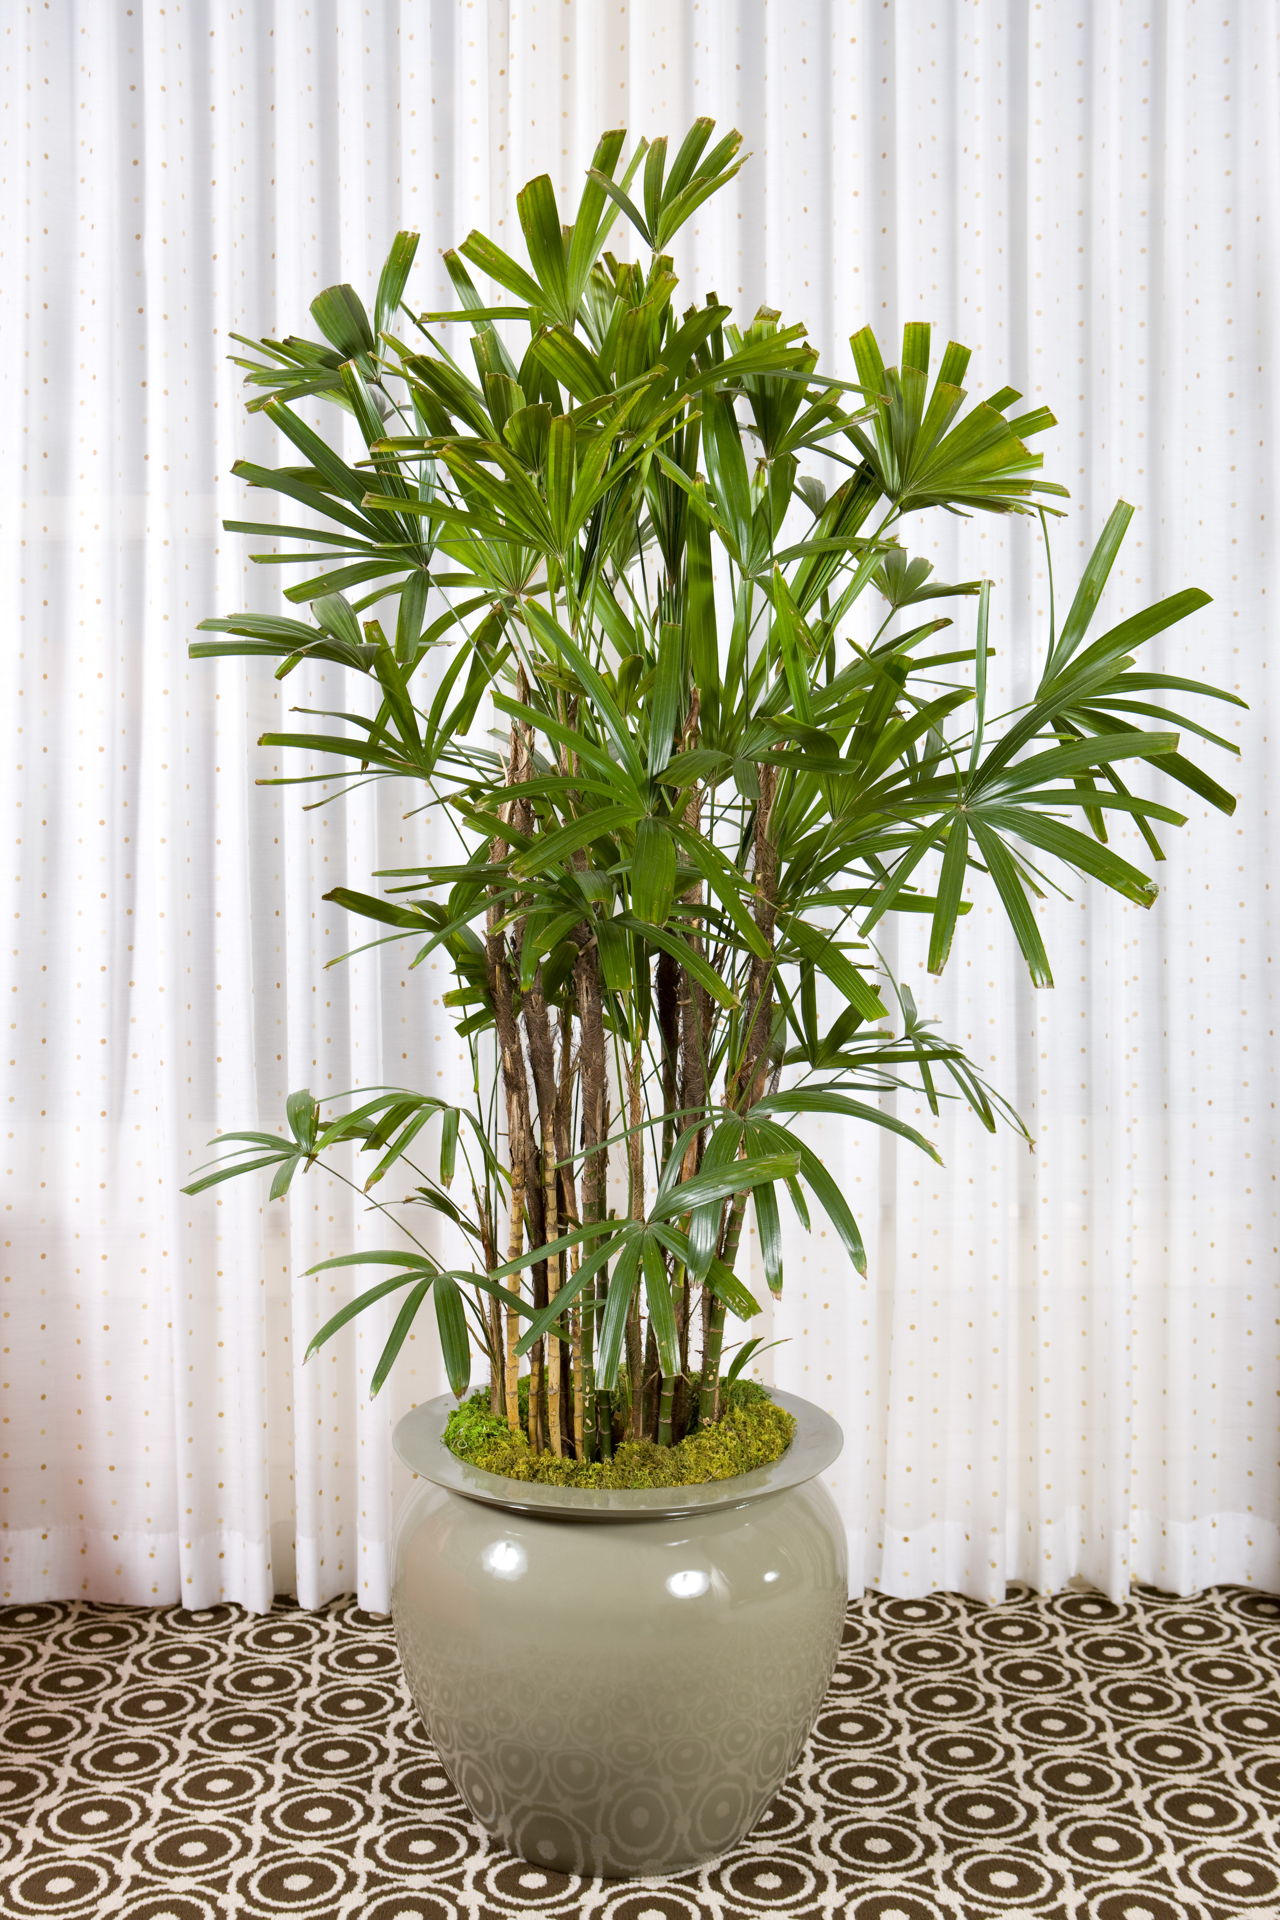 Tall Indoor Plants That are Beautiful and Easy to Maintain
